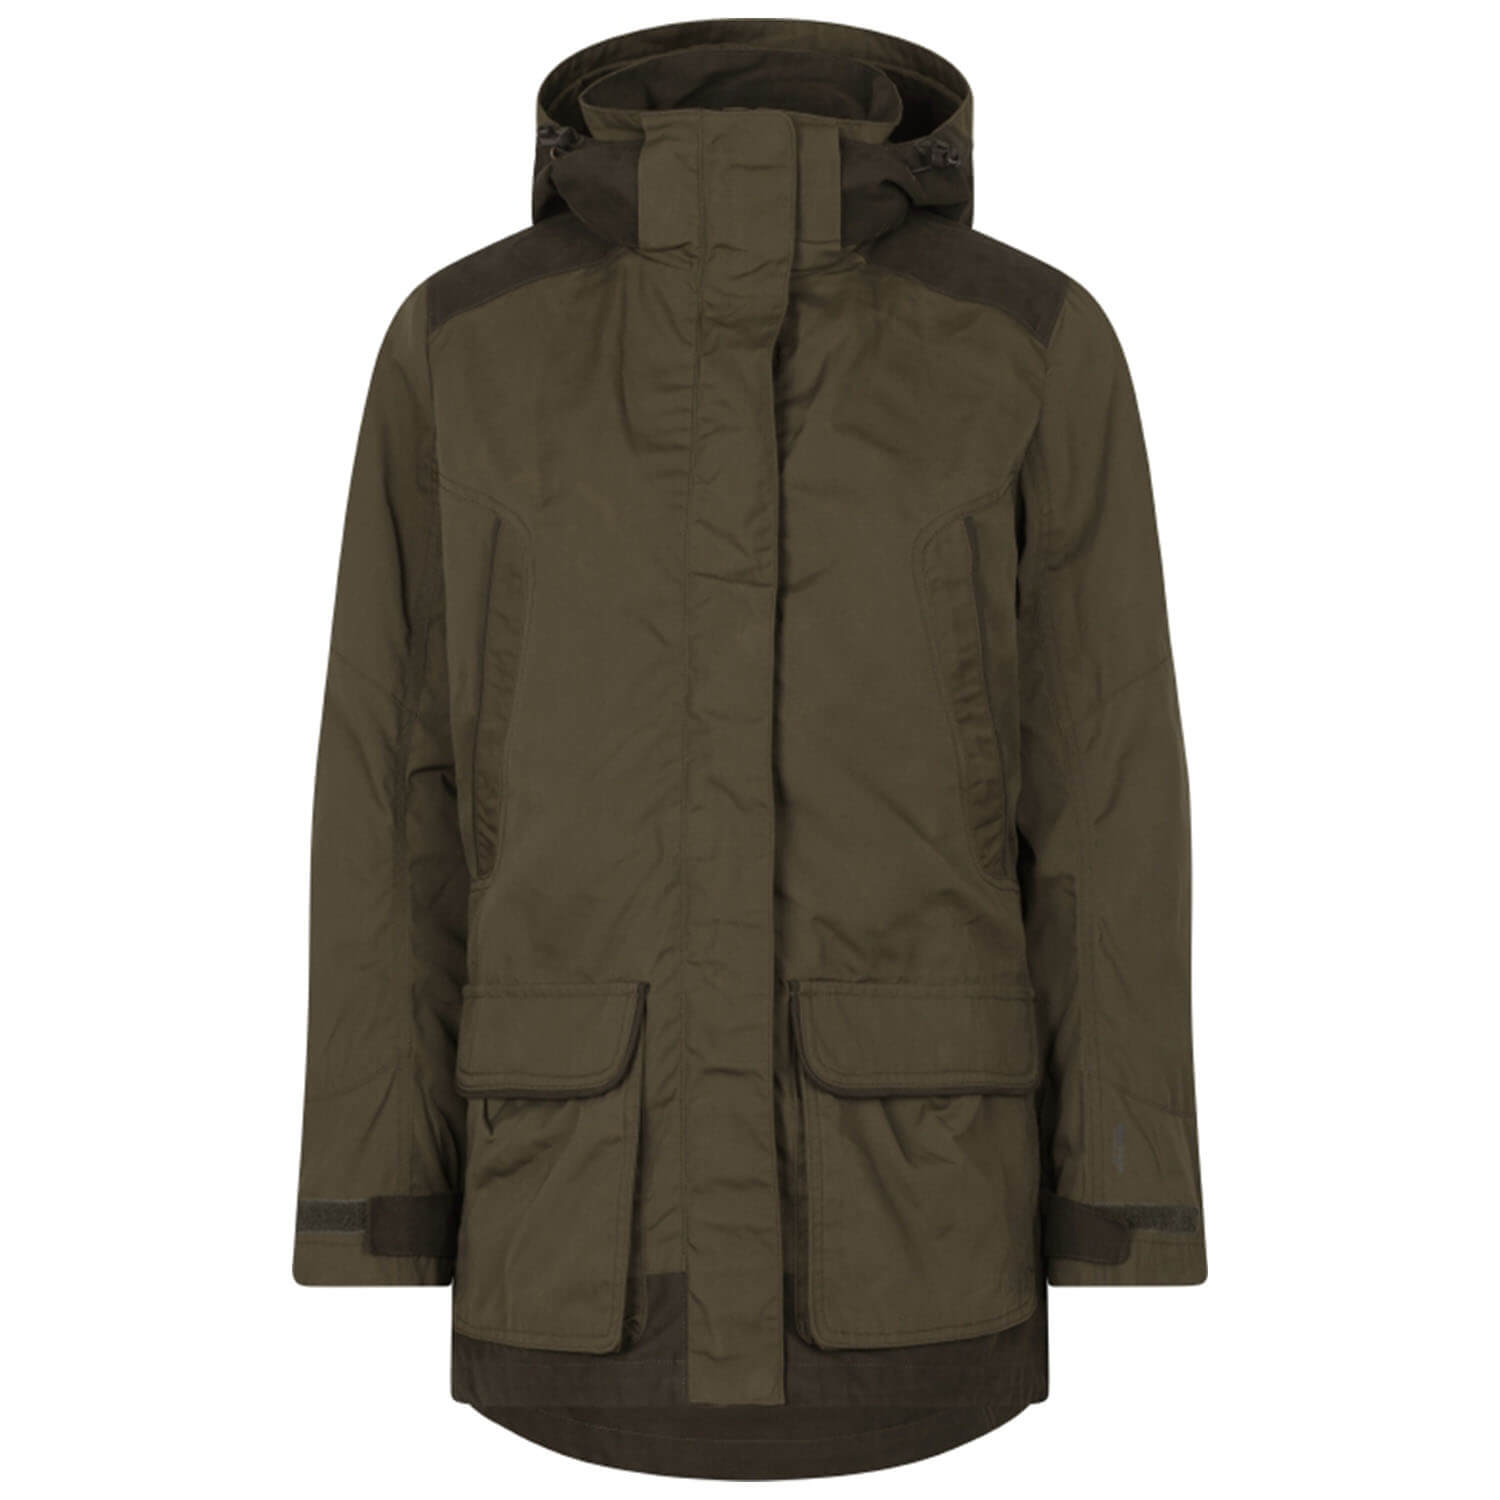 Seeland womenjacket keypoint kora (Pine Green/Grizzly Brown) - Hunting Jackets